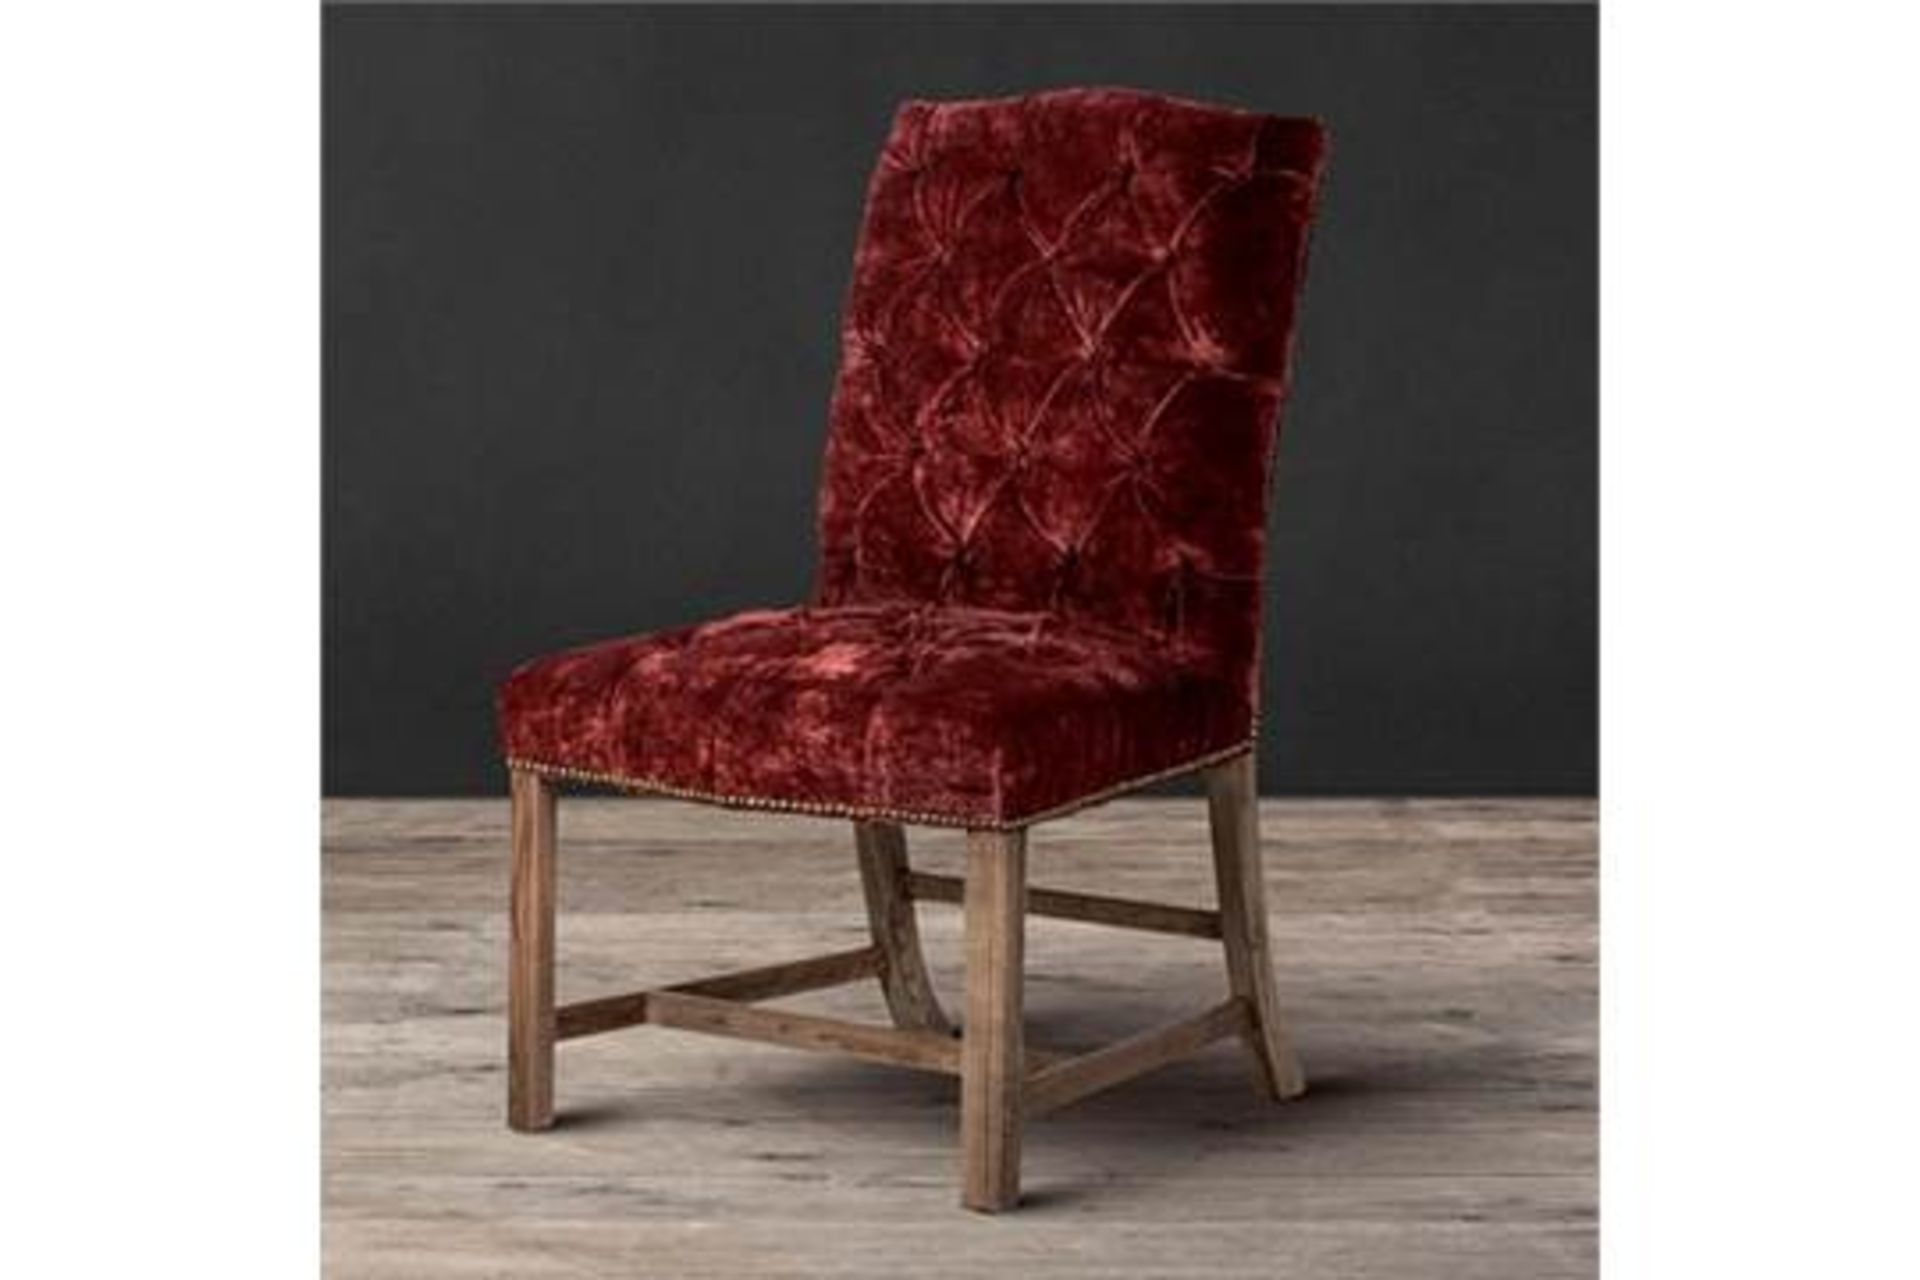 Regency Dining Chair -Siren Rose & Weathered Oak 60 X 67 X 98cm Inspired By Brighton Pavilion In